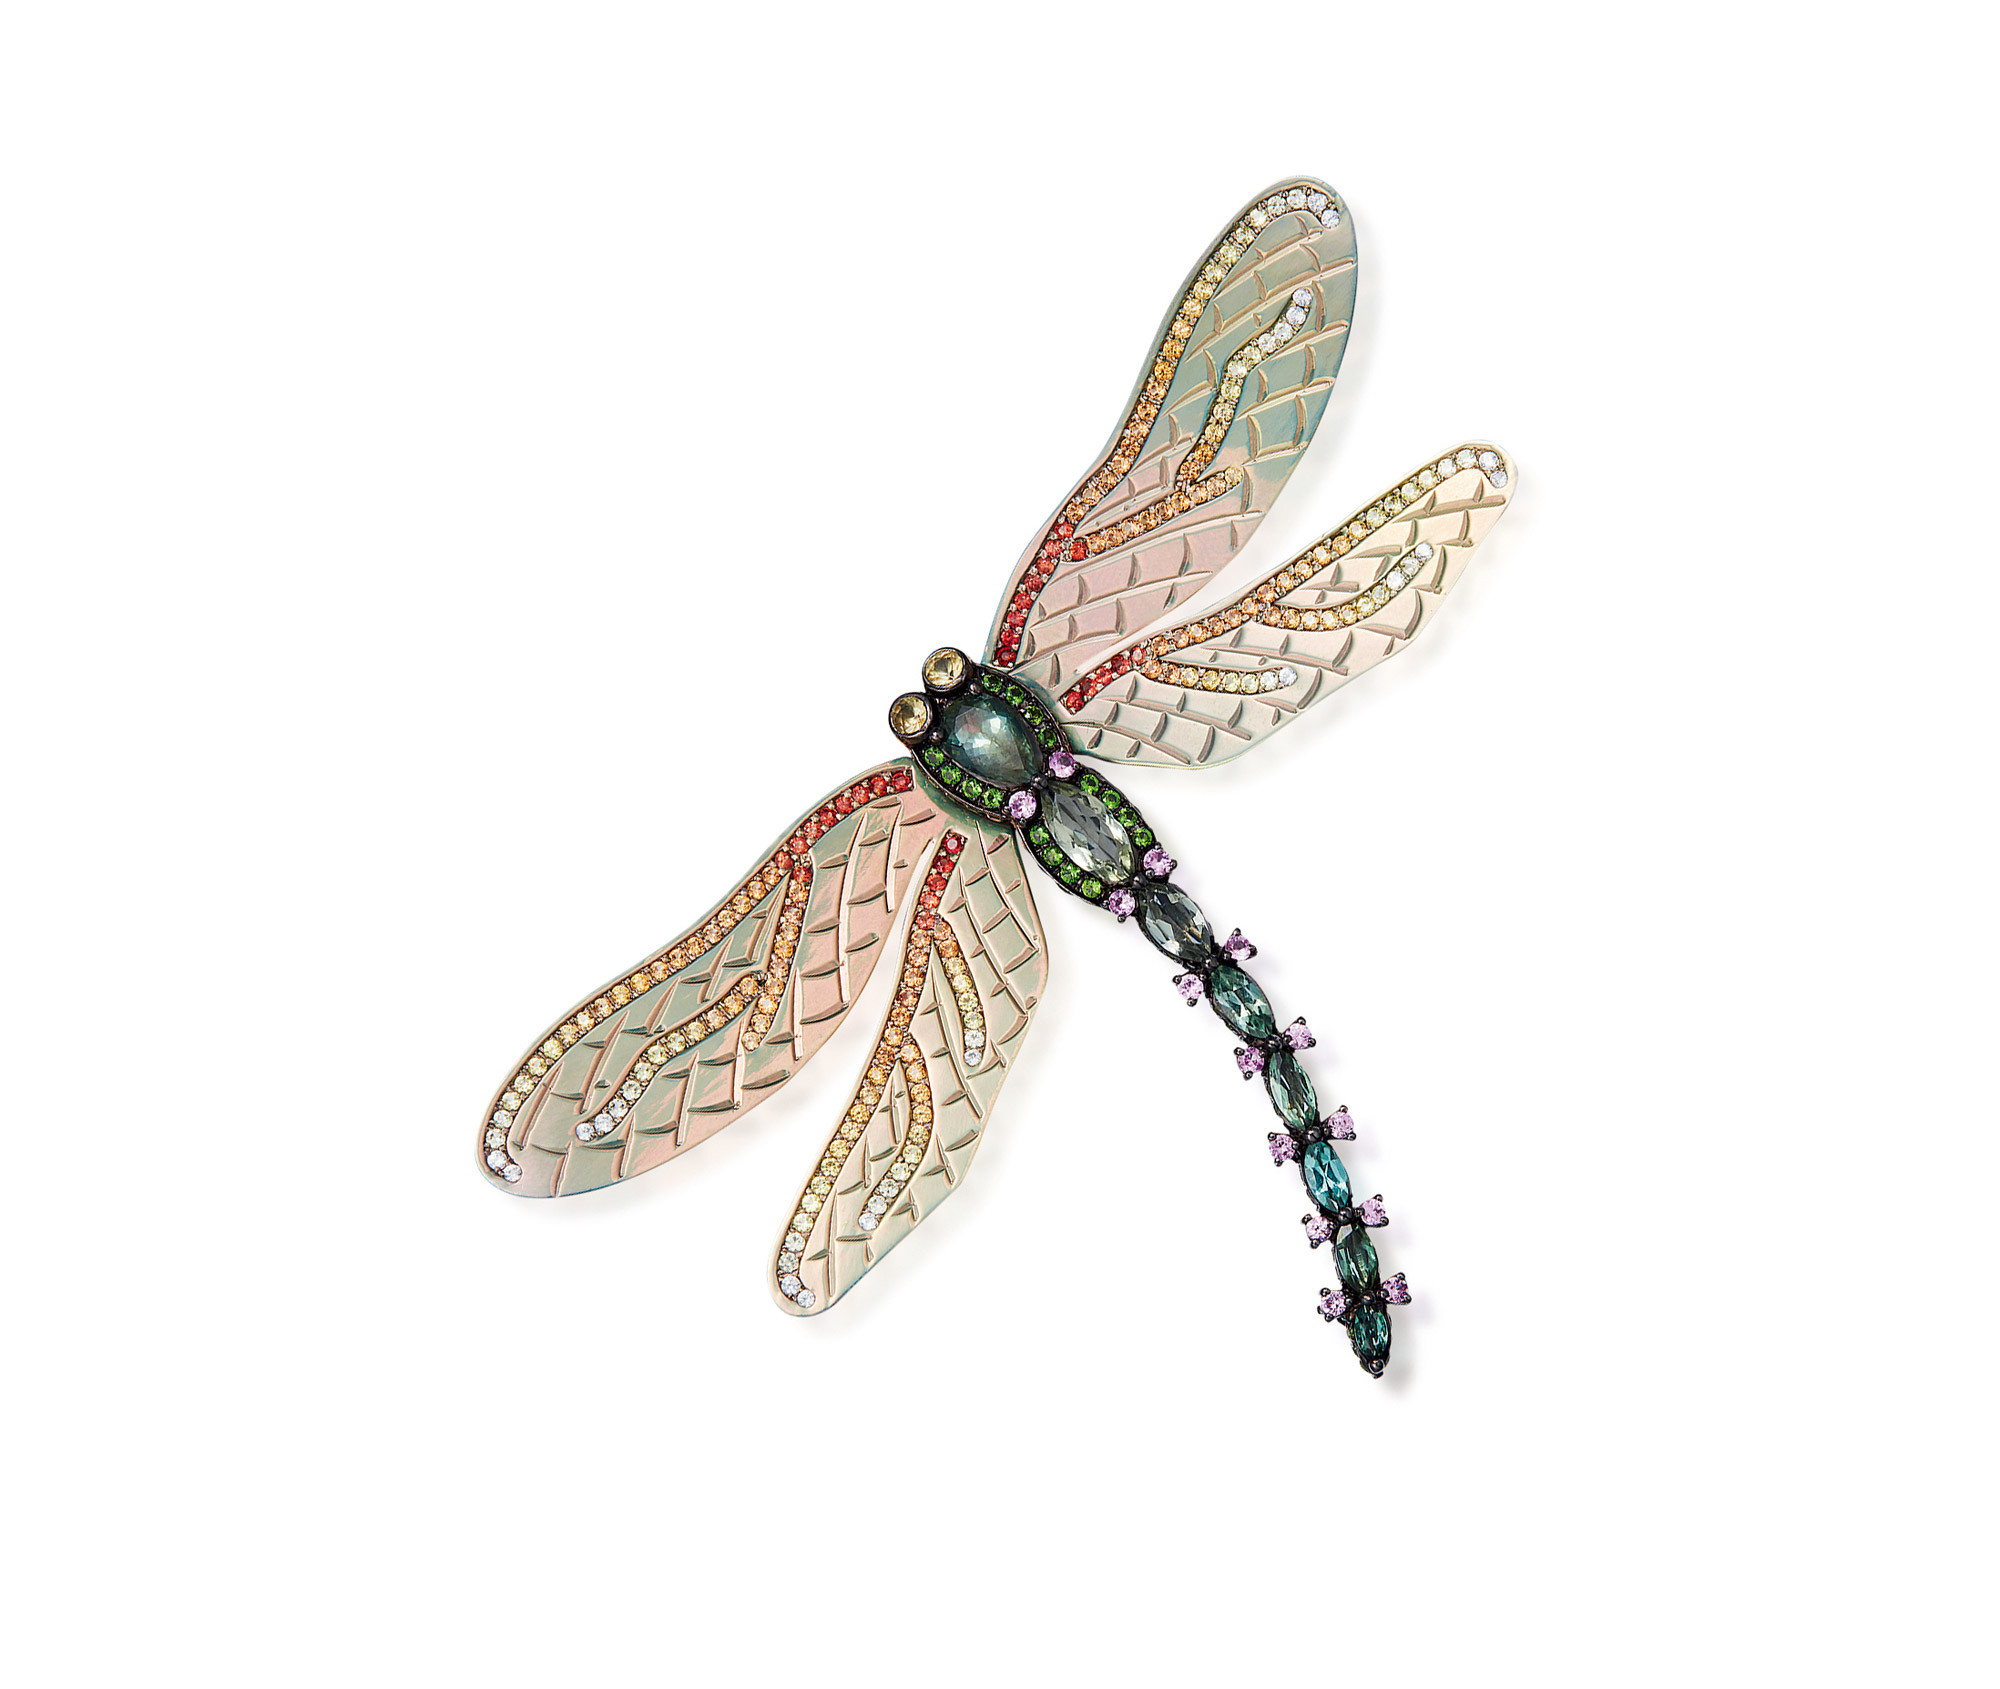 A COLORED SAPPHIRE AND TSAVORITE ’DRAGONFLY’ BROOCH